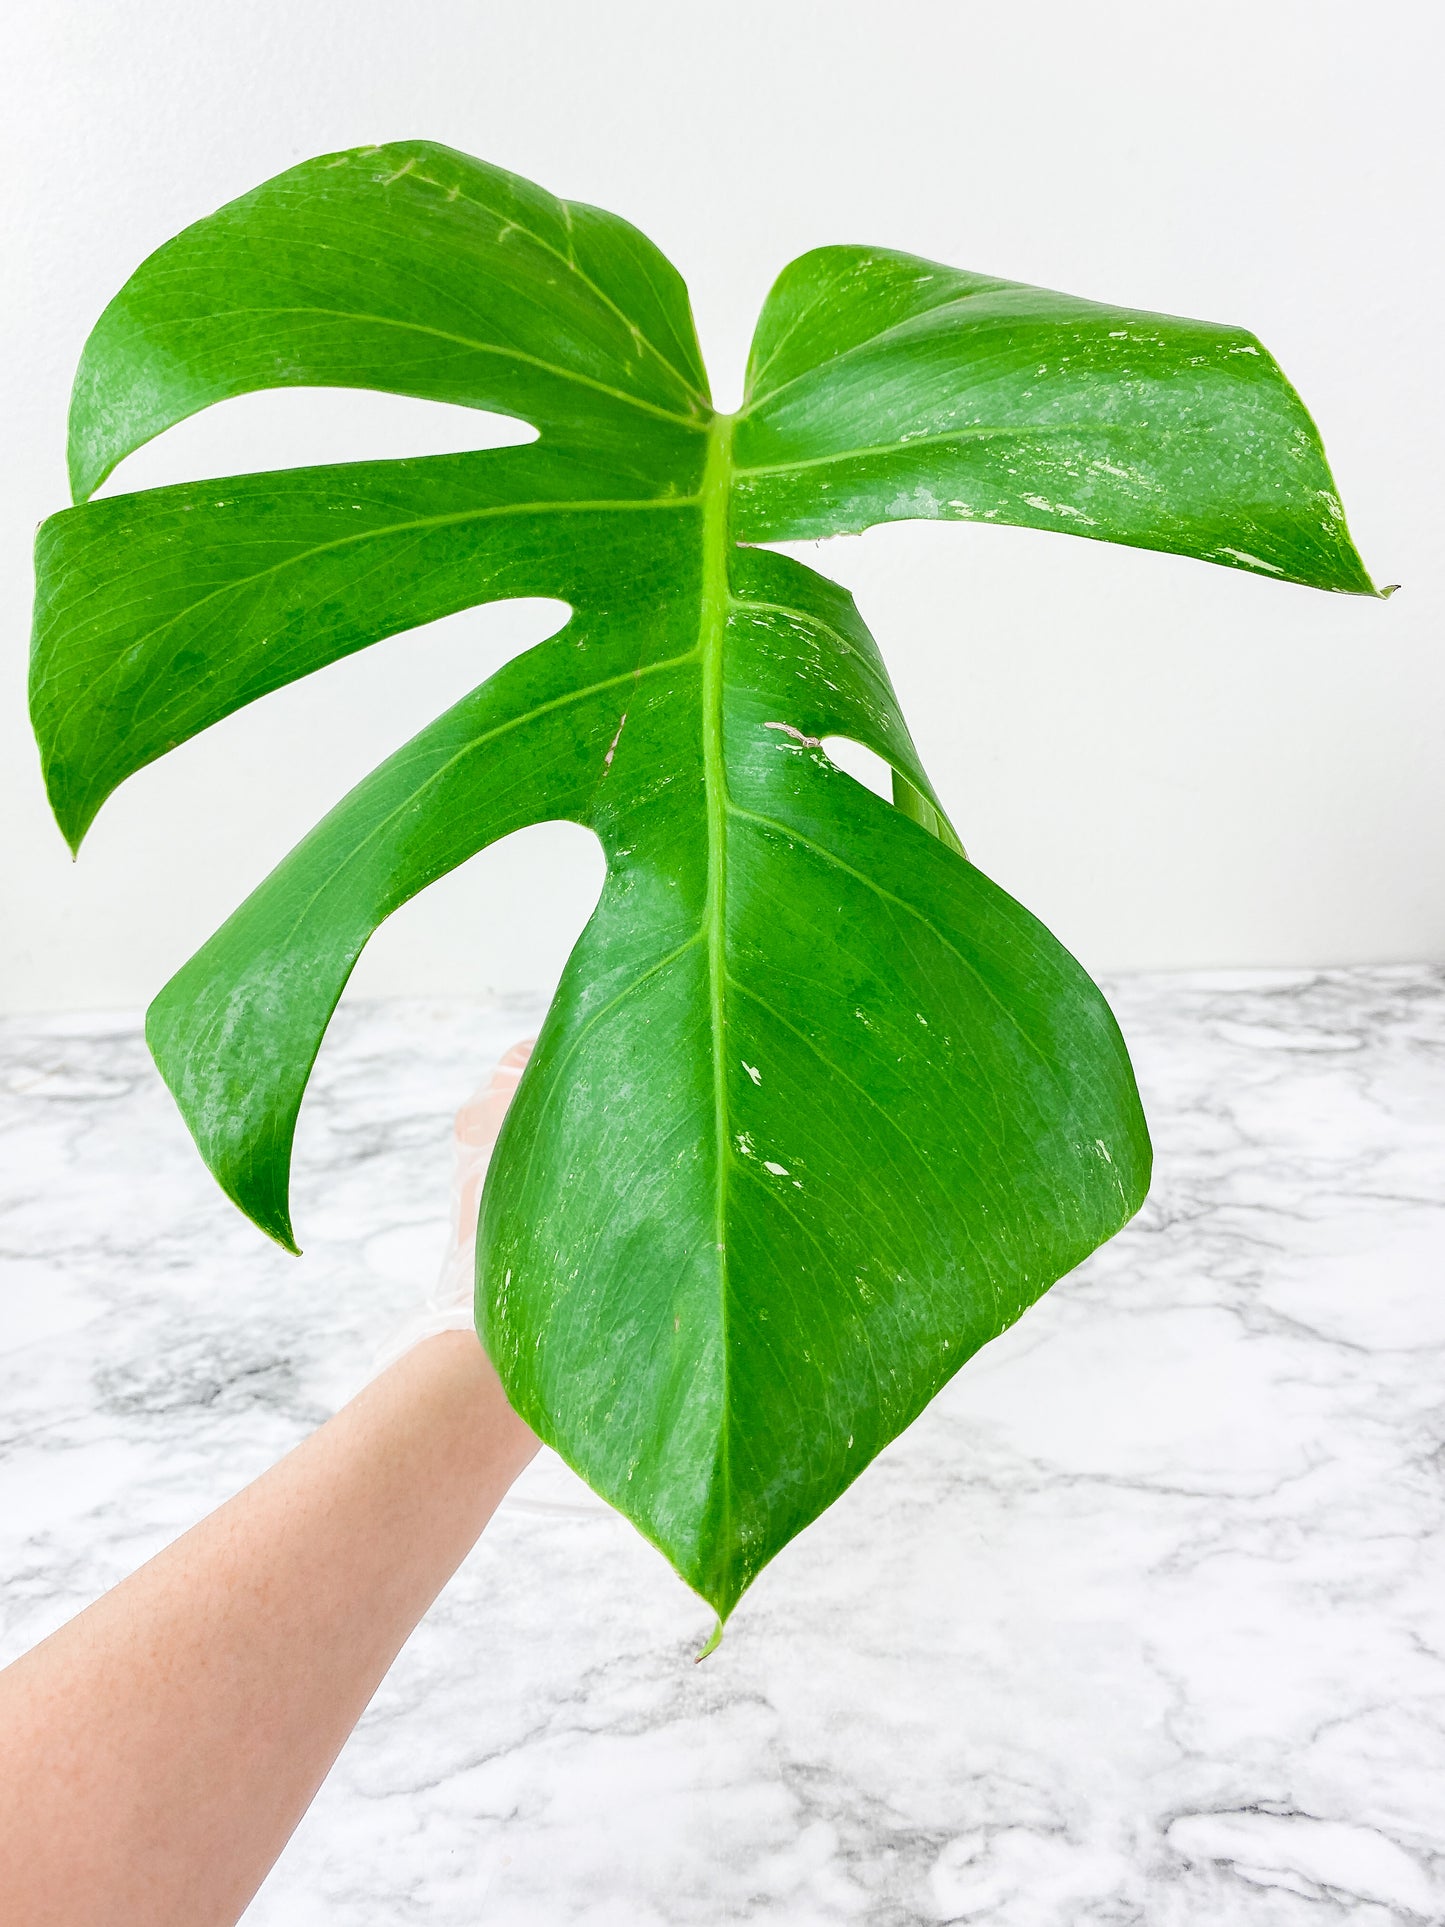 Monstera Albo Borsigiana 1 leaf rooting cutting from a highly variegated specimen